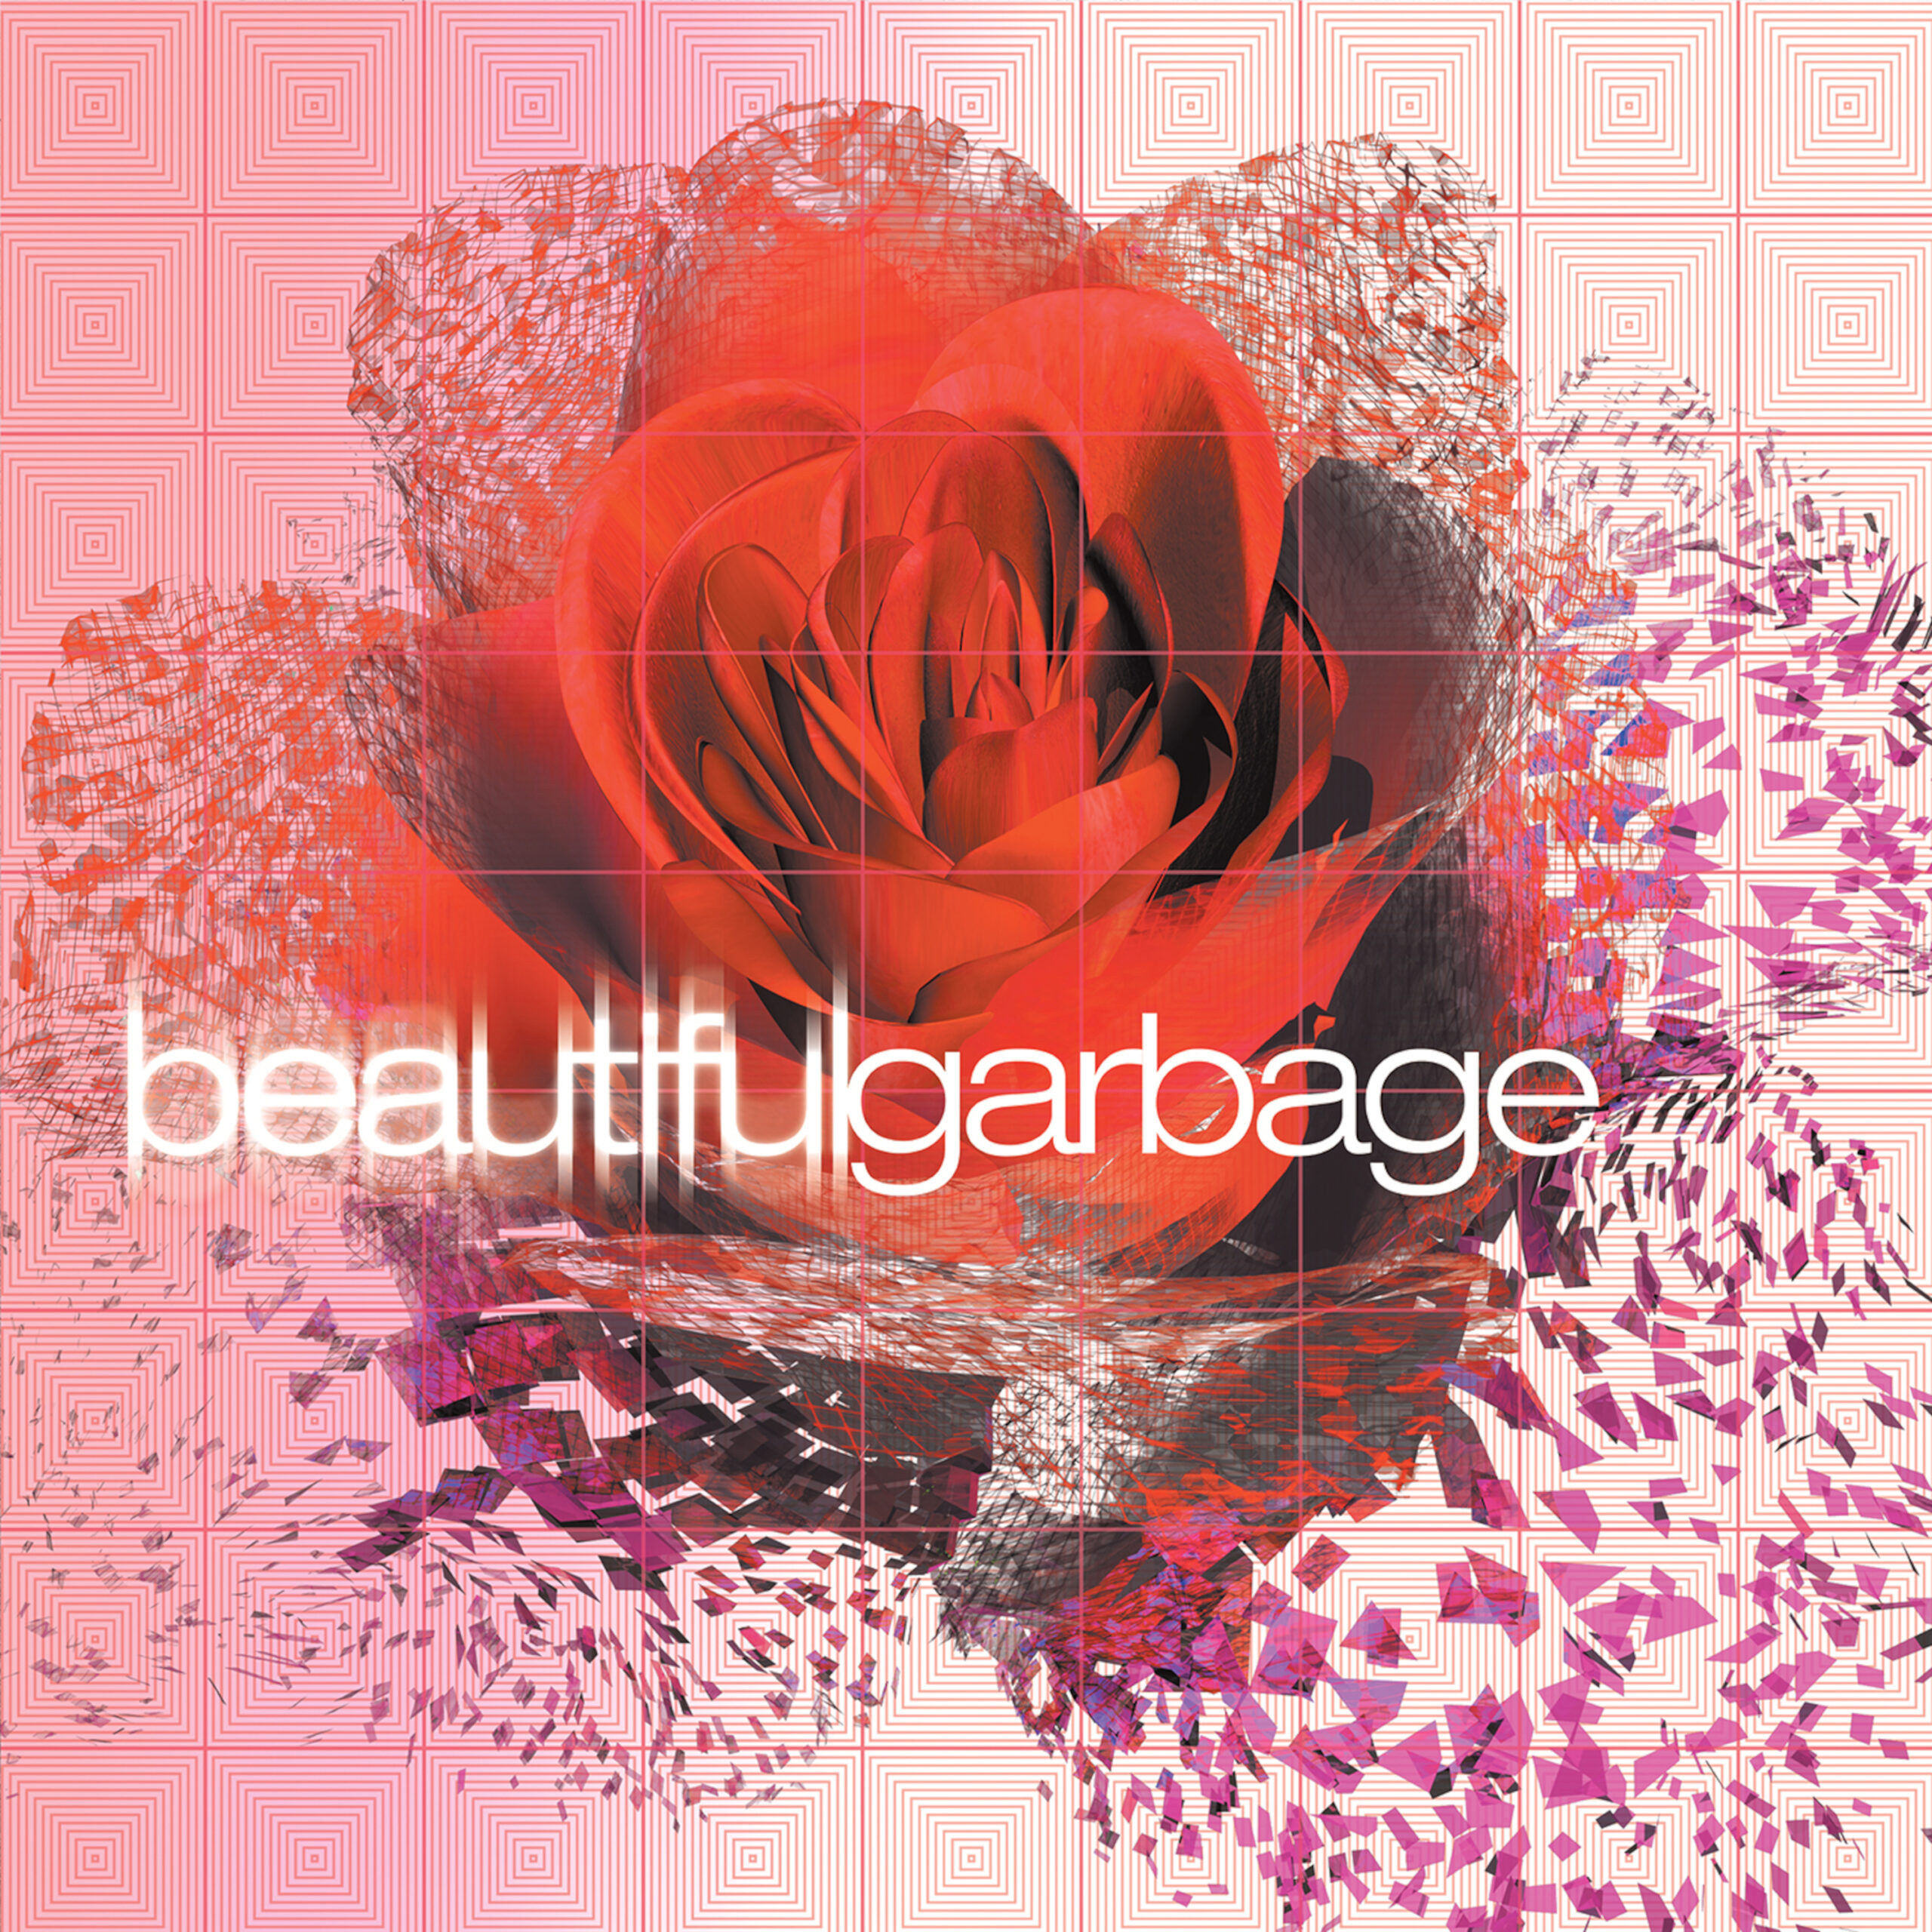 GARBAGE ANNOUNCE 20TH ANNIVERSARY REISSUE OF BEAUTIFUL GARBAGE